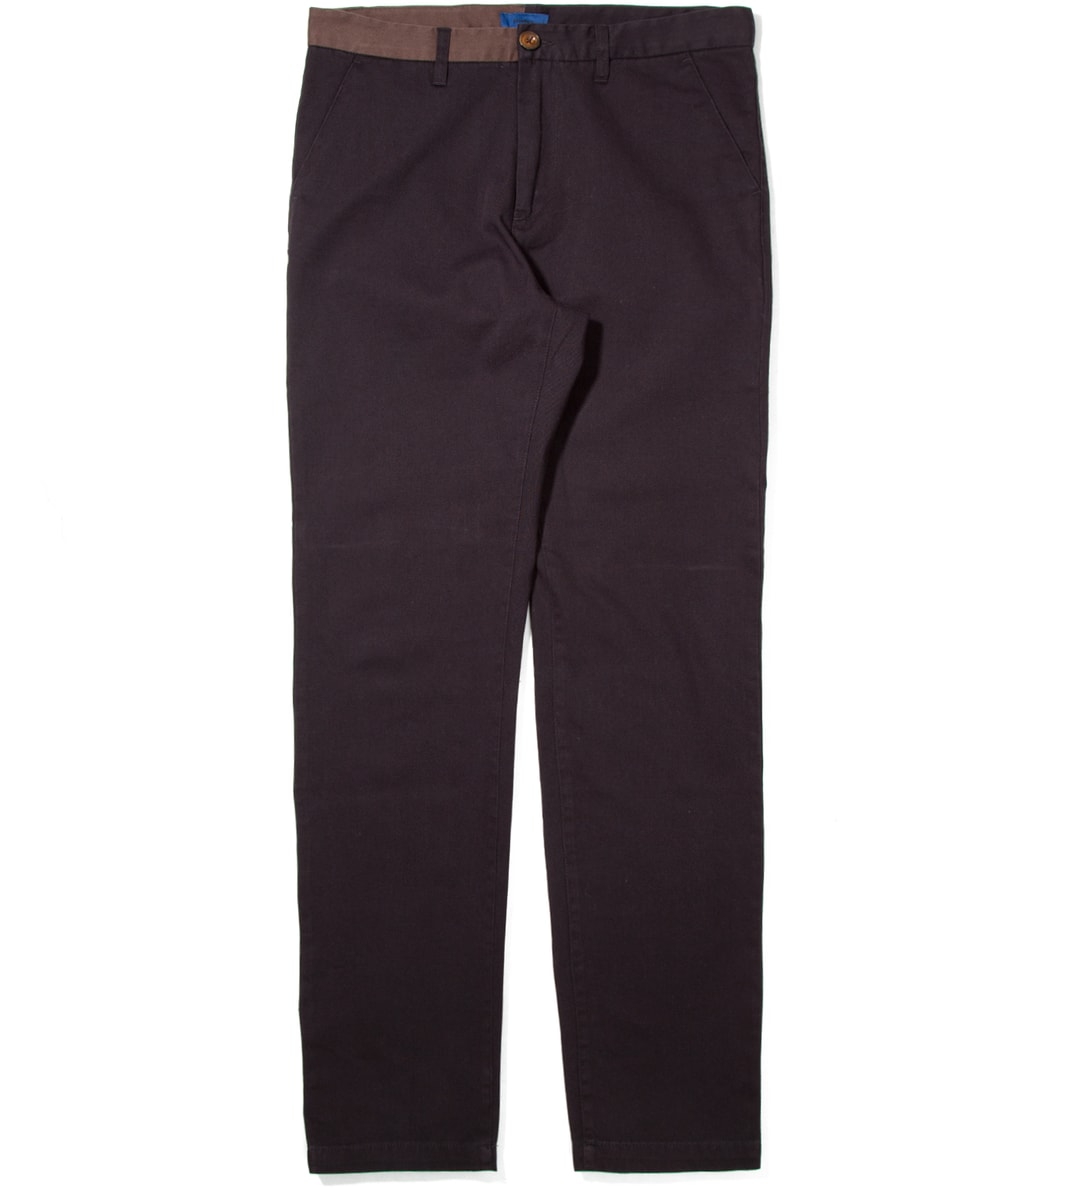 Études - Dark Navy Langage Pants | HBX - Globally Curated Fashion and ...